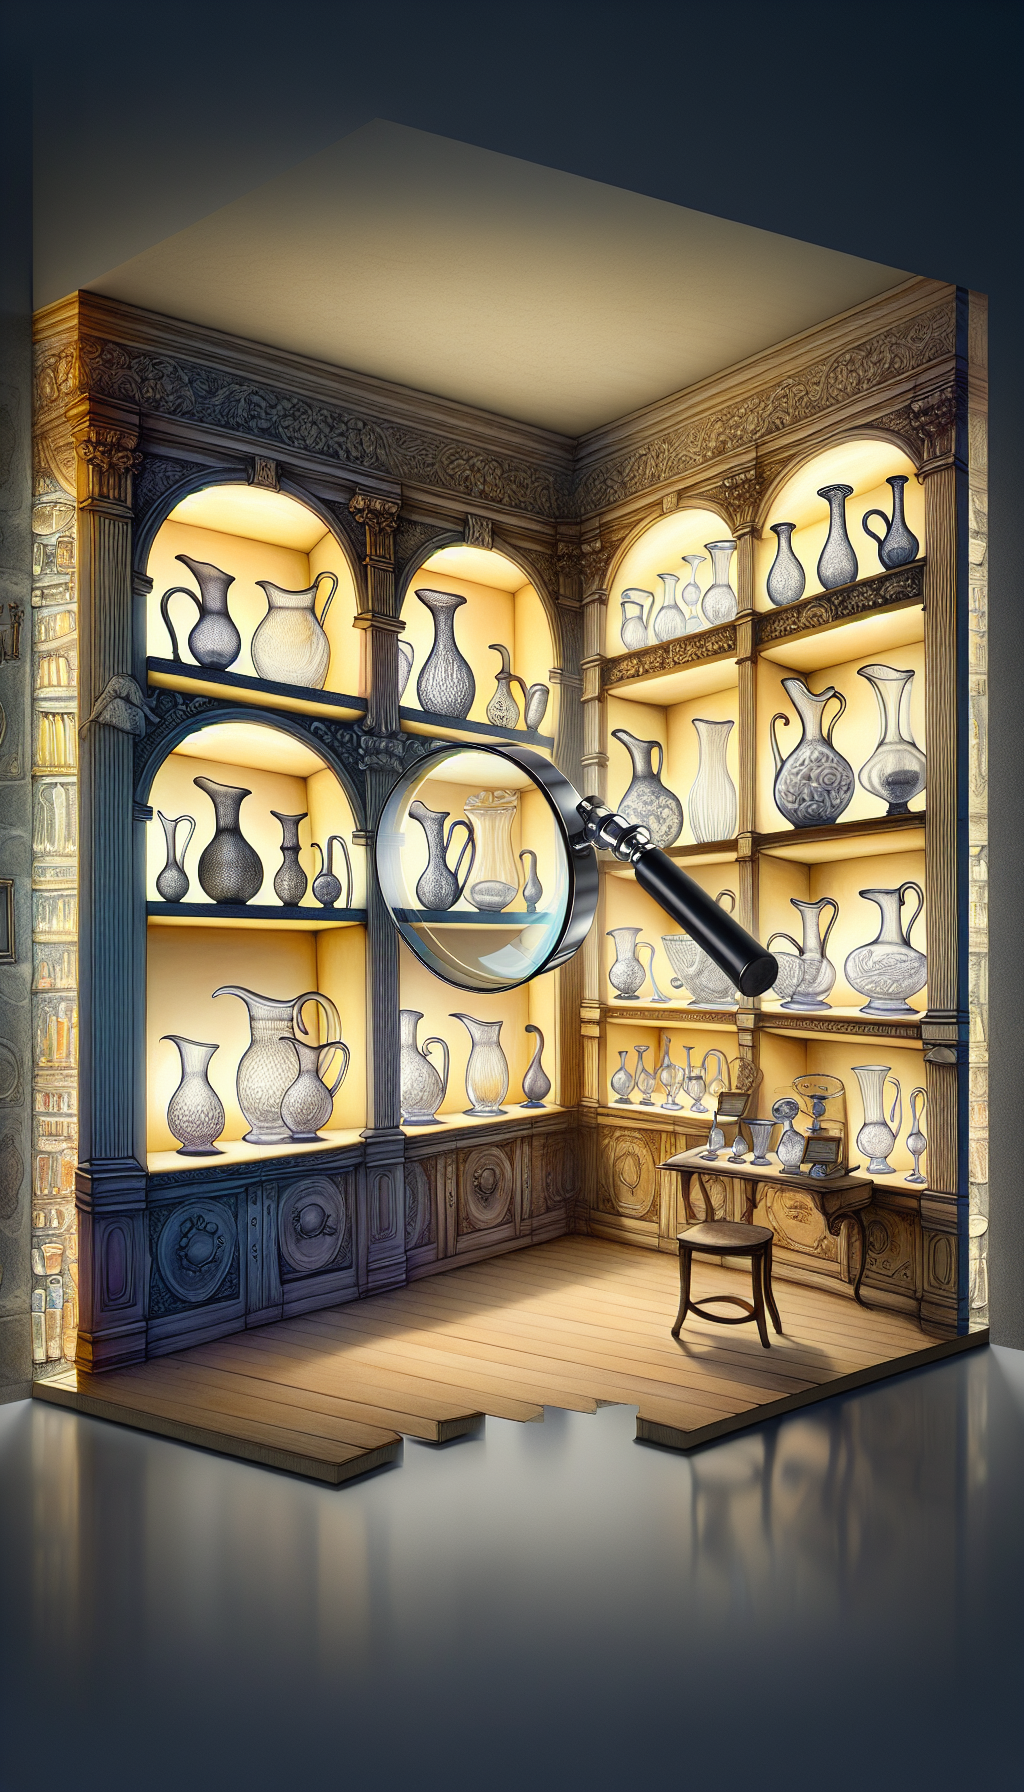 A whimsical cross-section of an antique shop with translucent walls, inside stands a row of glass pitchers floating on ornate shelves. Each pitcher casts a unique historical era's shadow on the wall behind, doubling as a guide. A magnifying glass hovers over, revealing intricate details and maker's marks, symbolizing the identification process, while light intricately plays through the varying textures and colors.